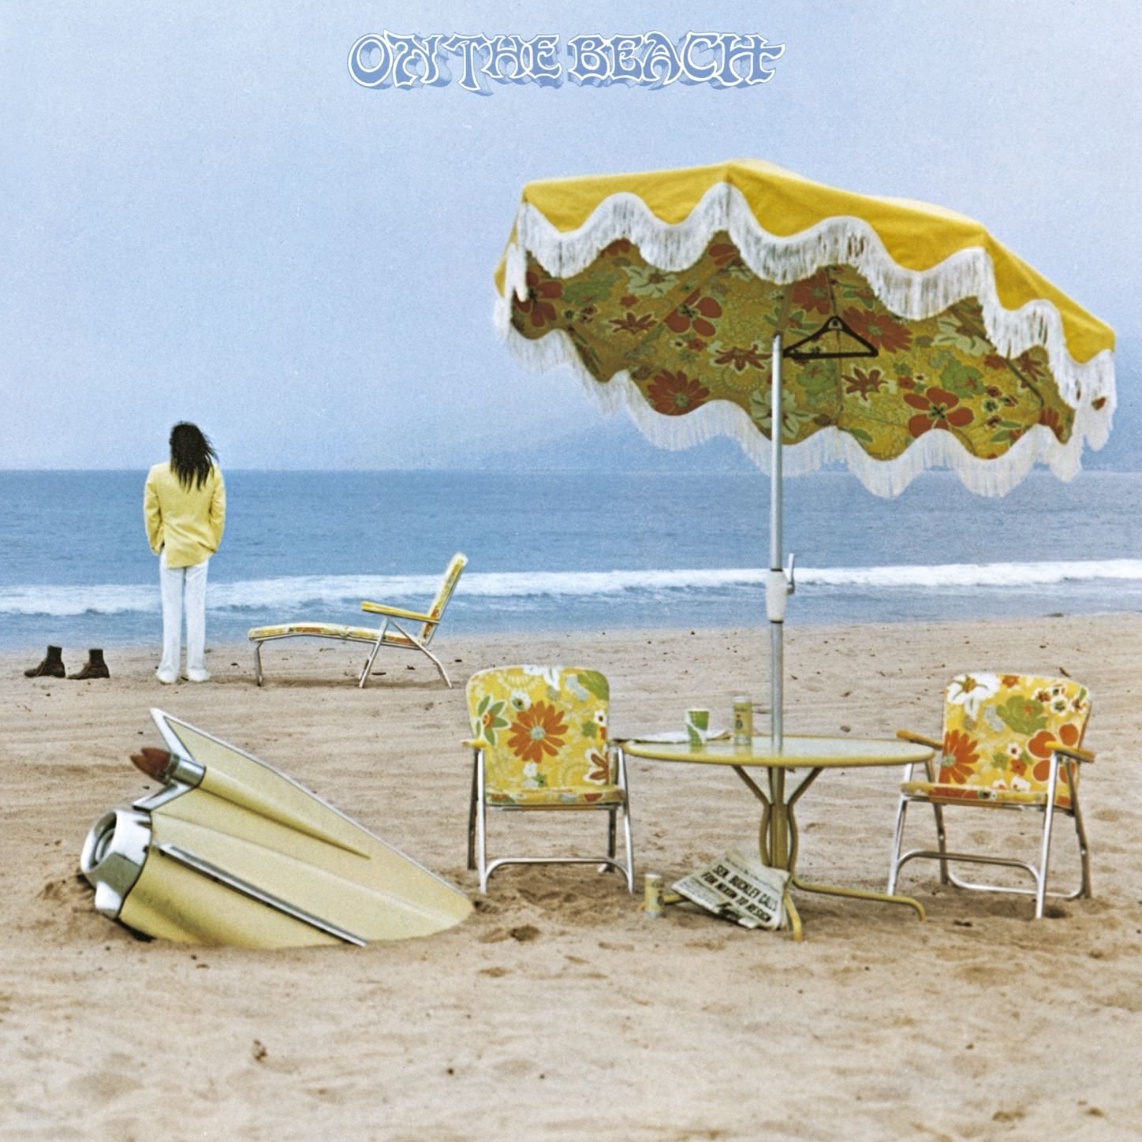 Neil Young, On the beach, cover, 1974